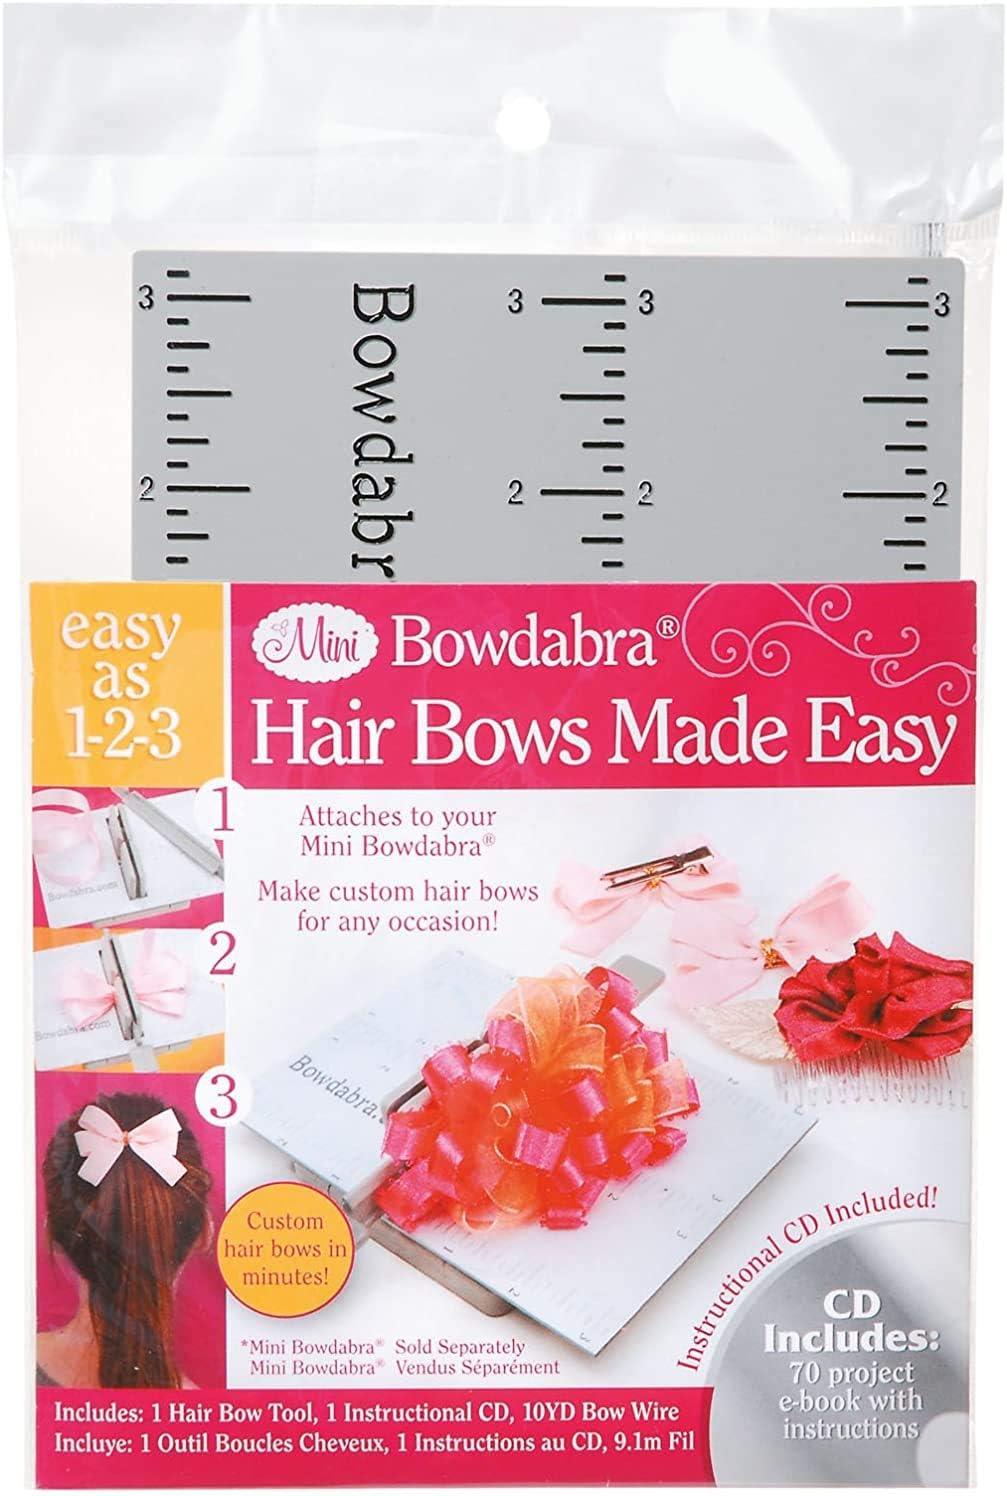 How to Make a Bow with the Bowdabra Bow Making Design Tool